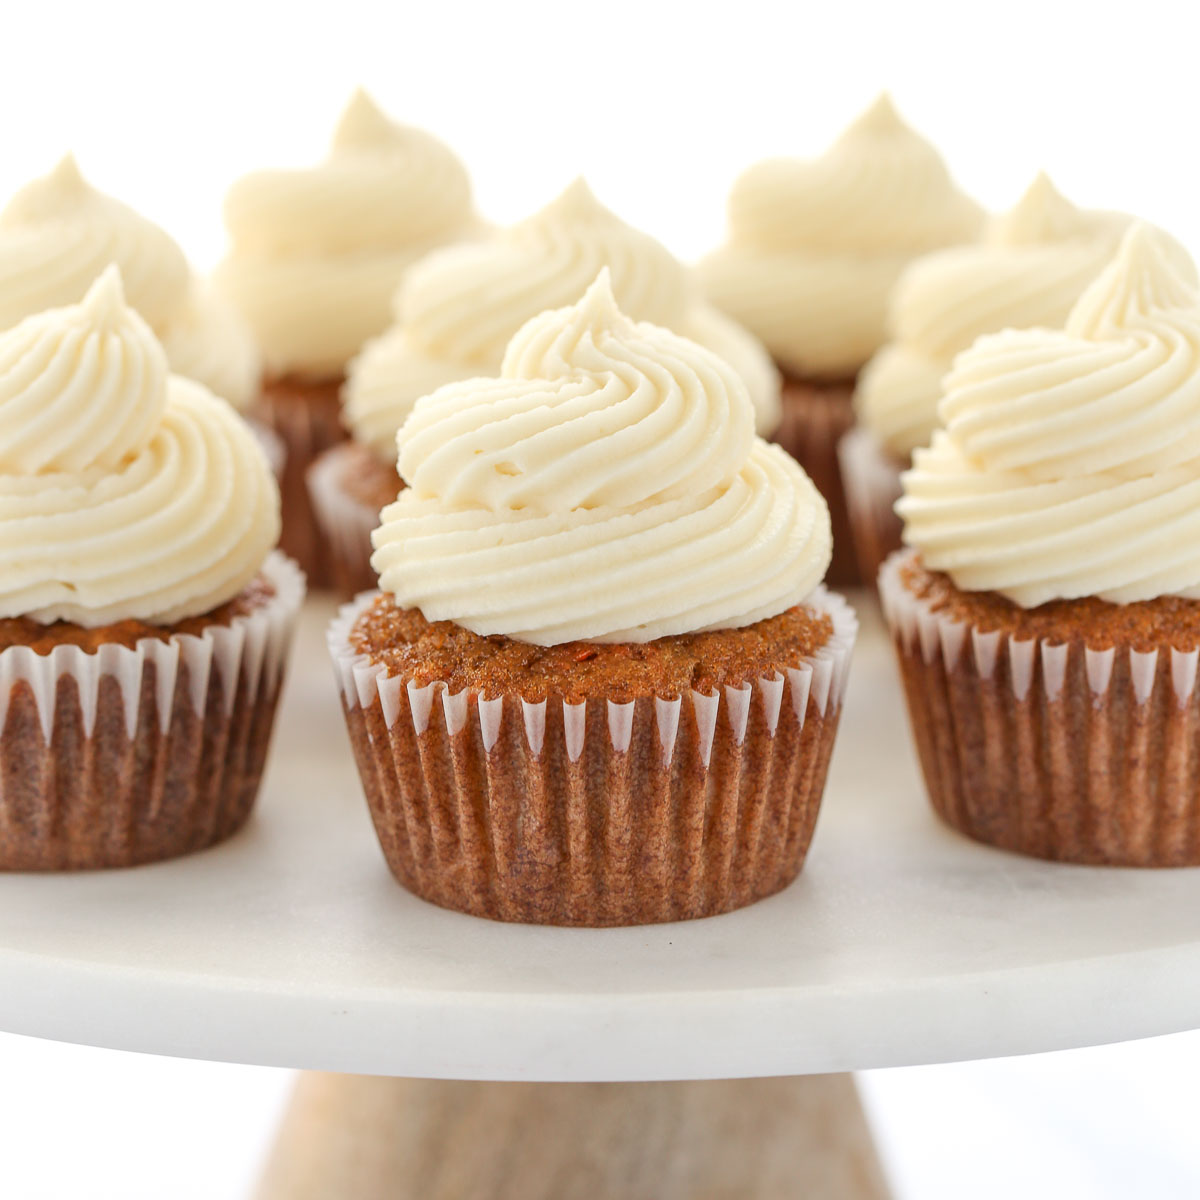 Ultra-Moist Carrot Cake Cupcakes and Best-Ever Cream Cheese Frosting